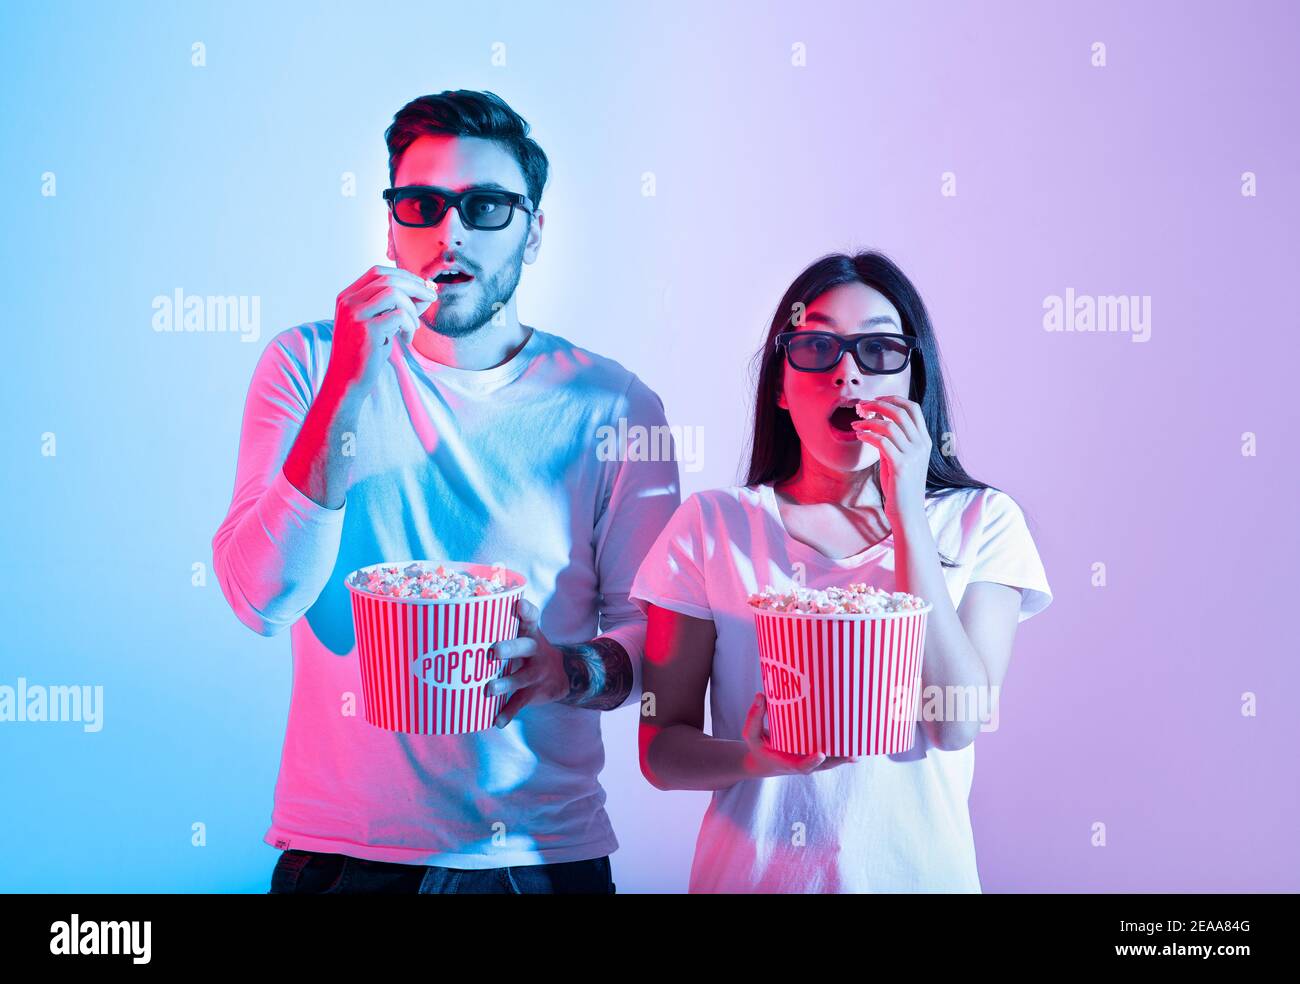 Amazing entertainment, leisure time together and cinema with modern technology Stock Photo